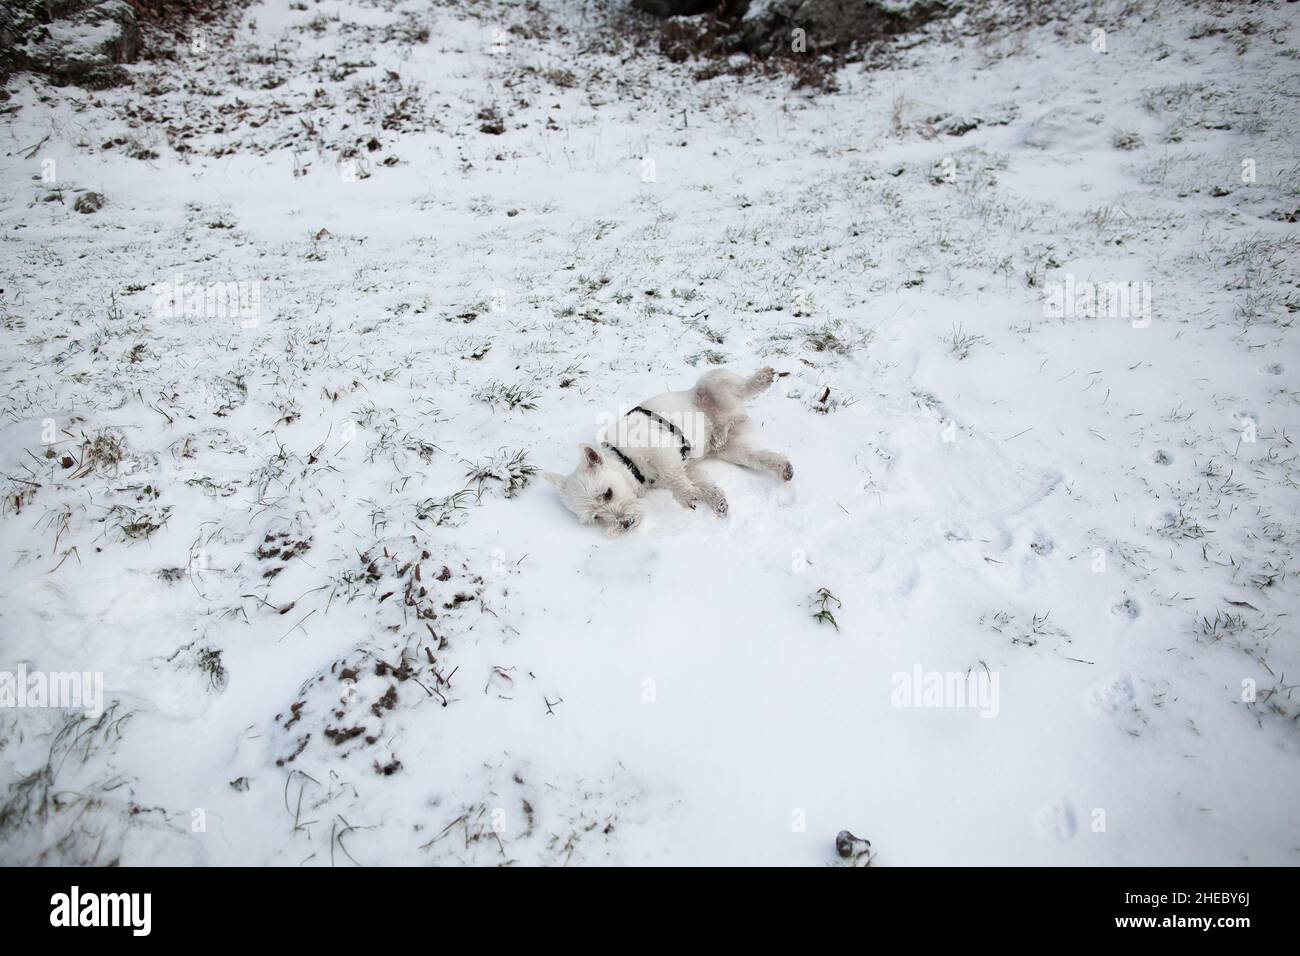 West highland white terrier dog roll in snow | Small white terrier dog lay and play in snow in winter Stock Photo